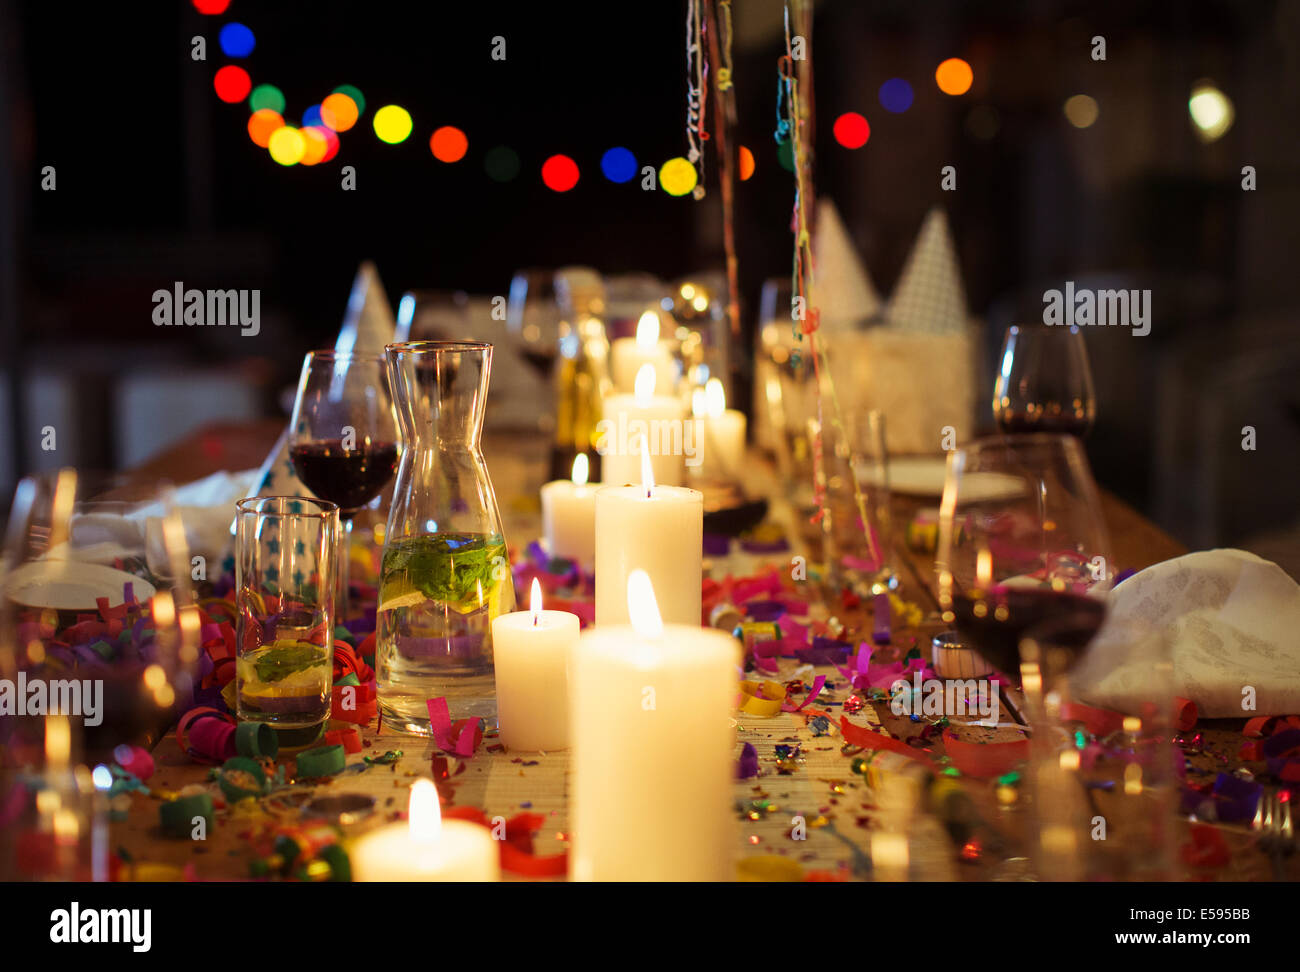 Lit candles on table at party Stock Photo